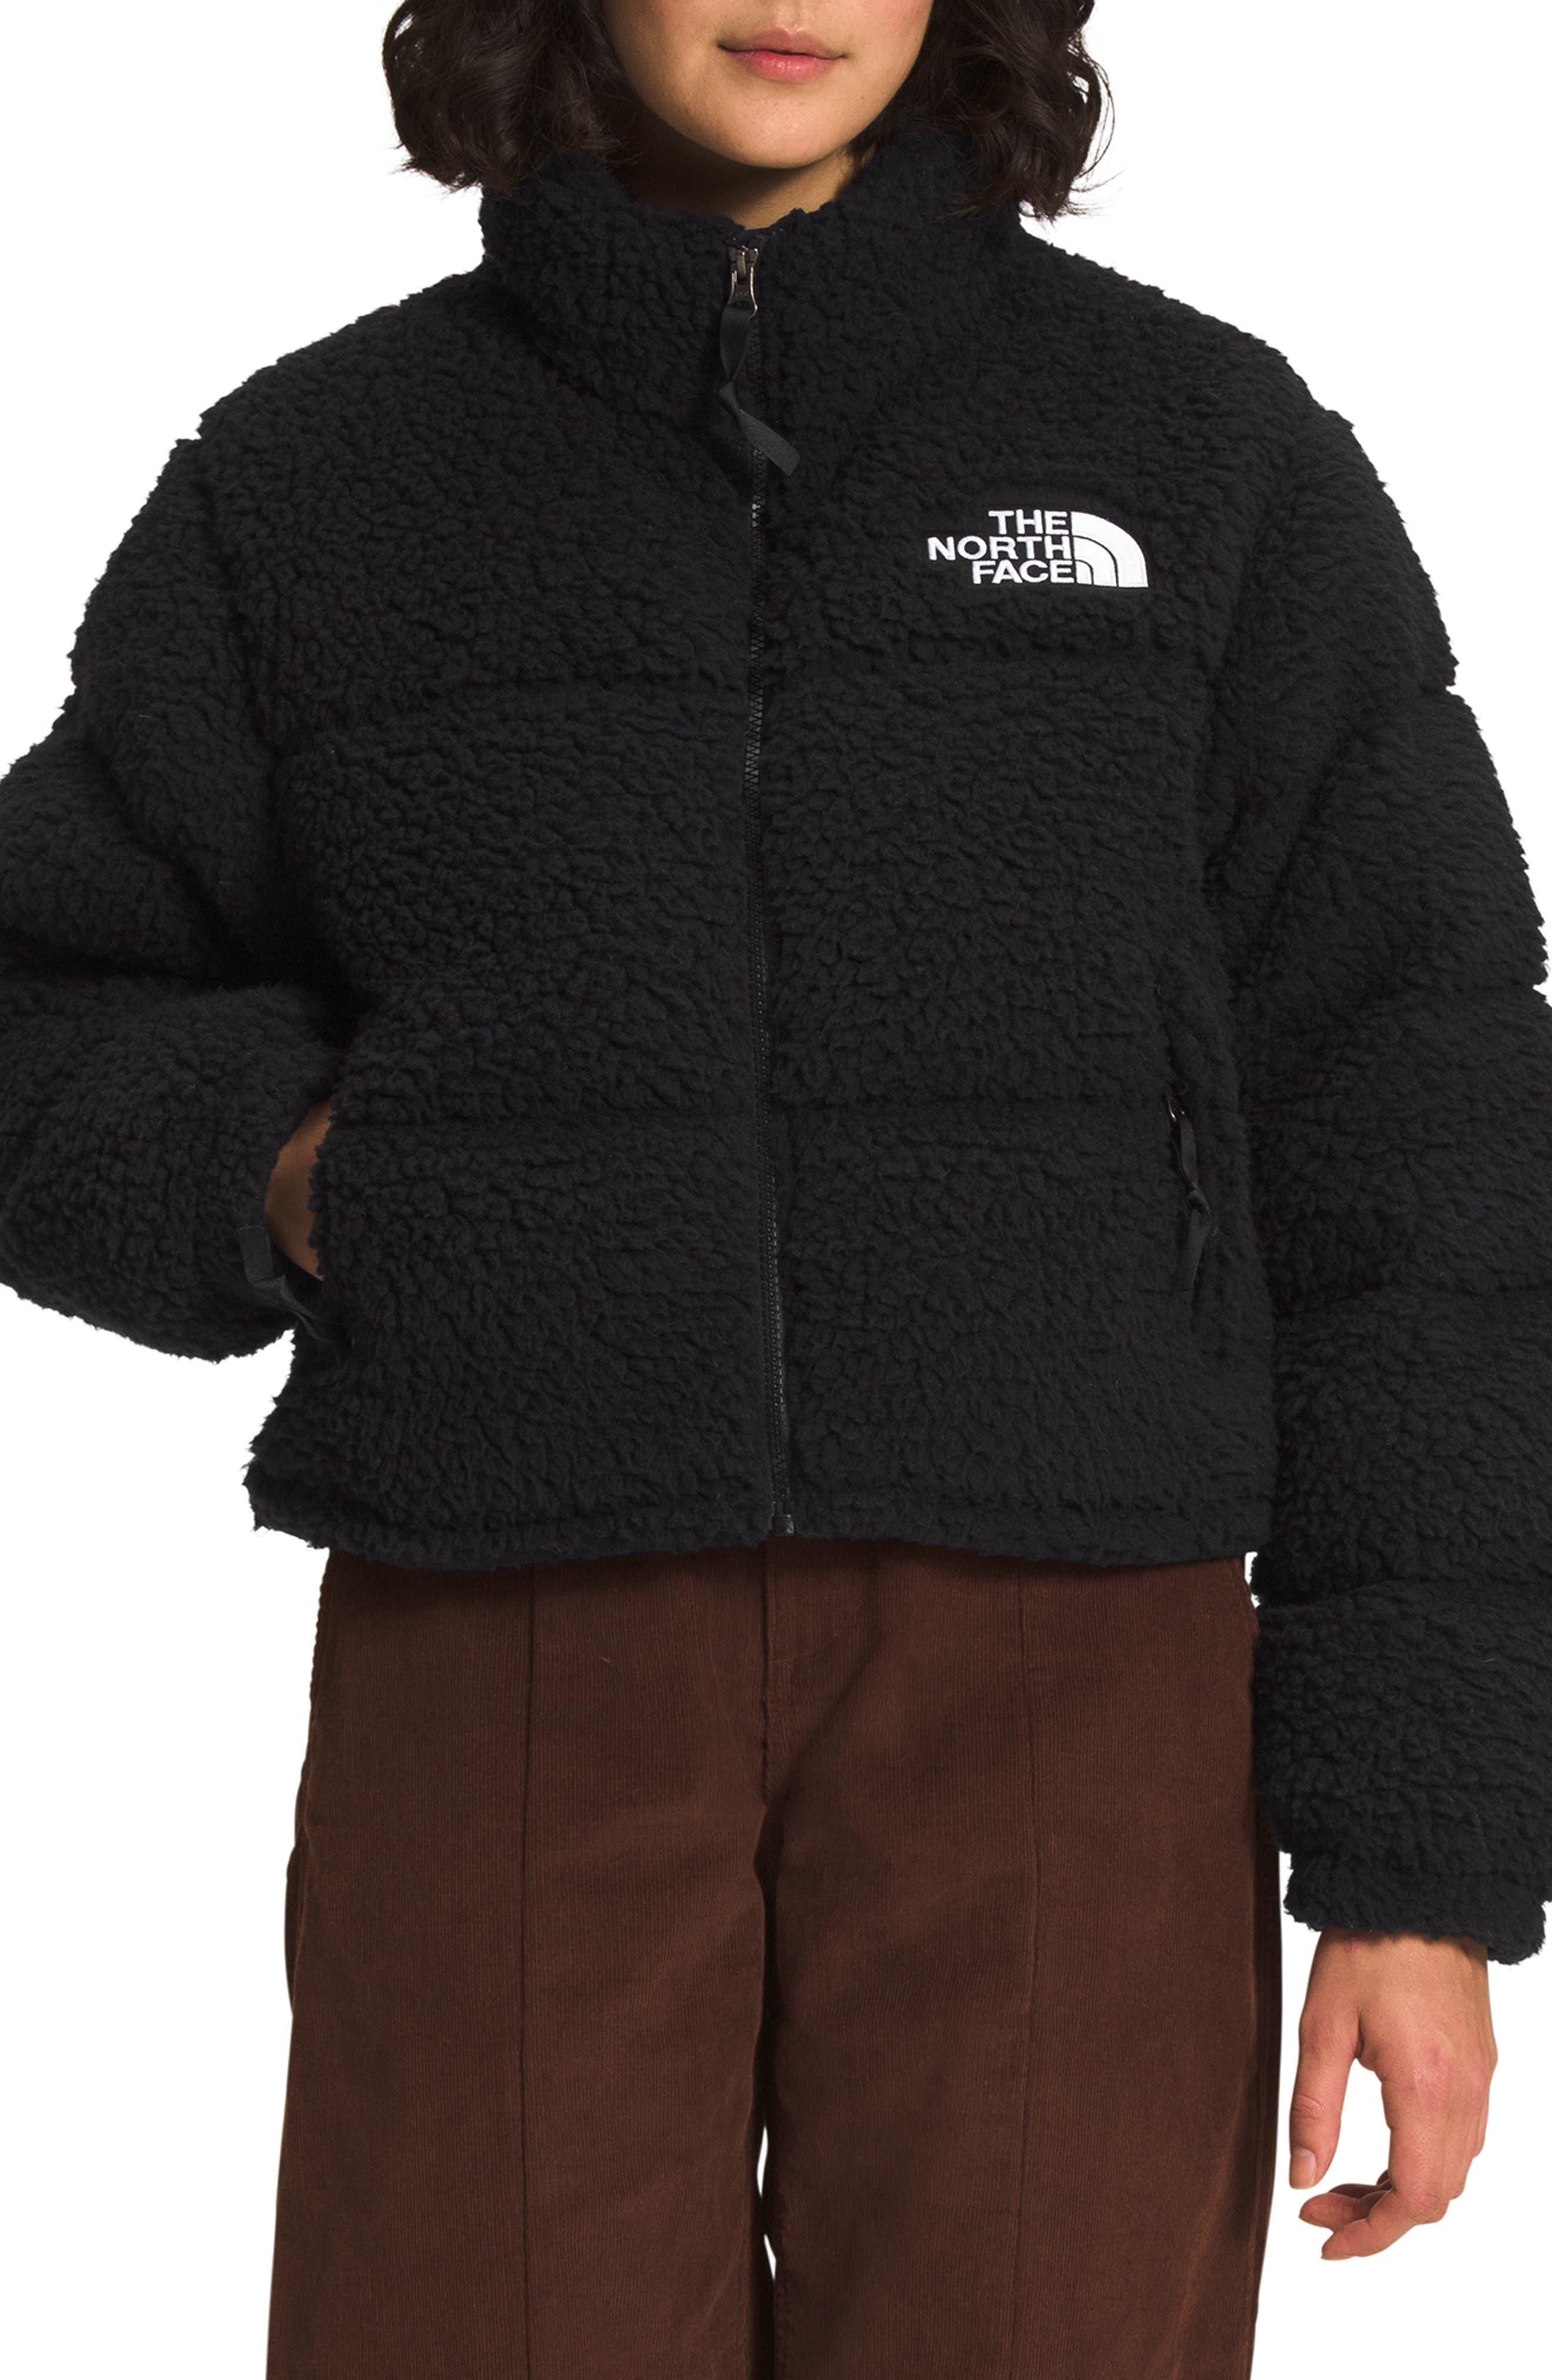 The North Face High Pile Fleece Nuptse Jacket in Black | Lyst